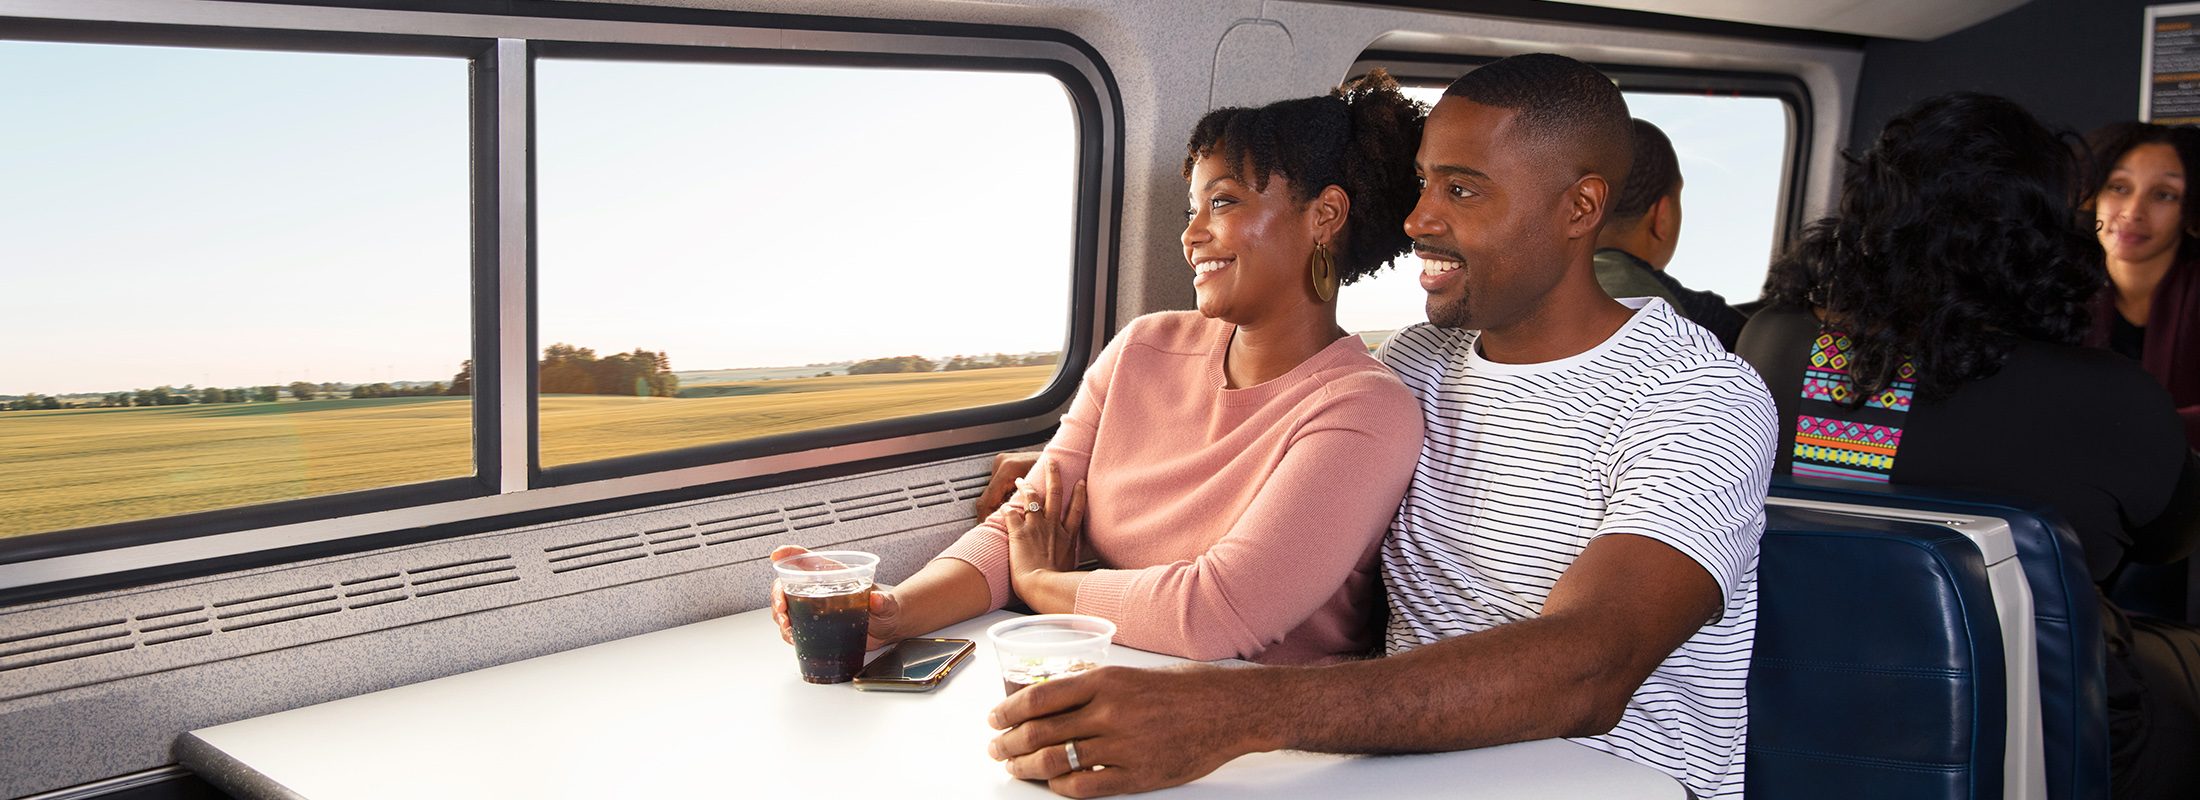 Couple onboard train gazing out the window while enjoying refreshments